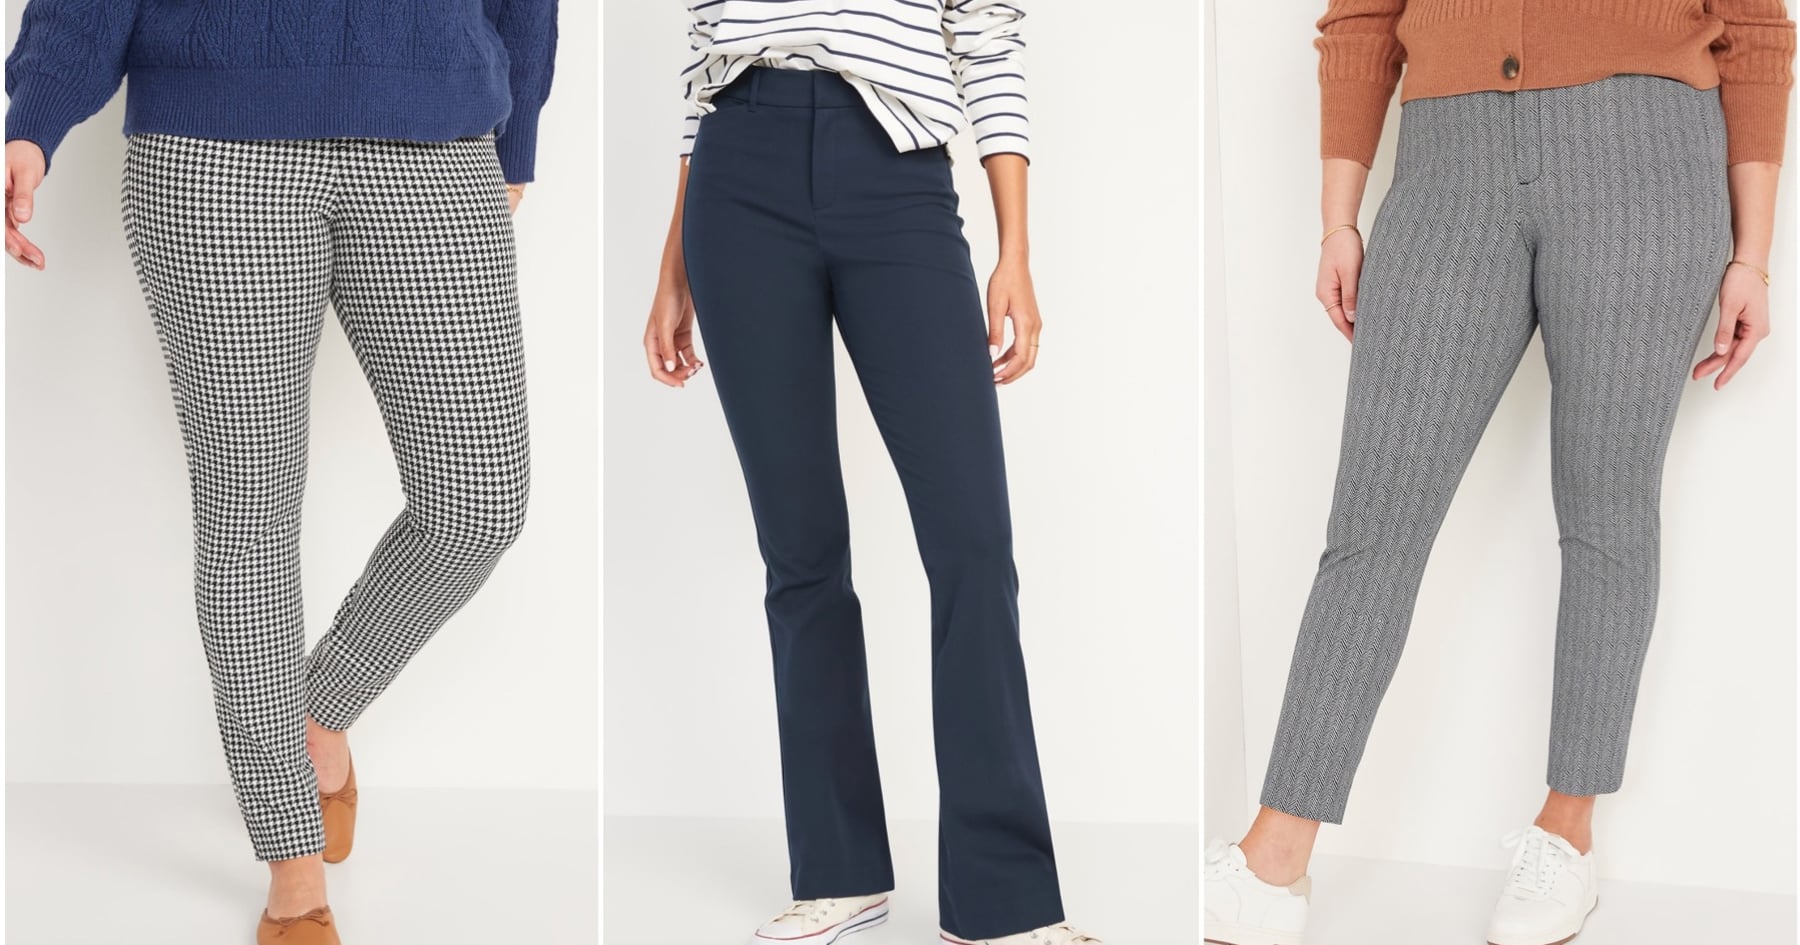 Wear to Work: Pixie Pants - The Styled Press